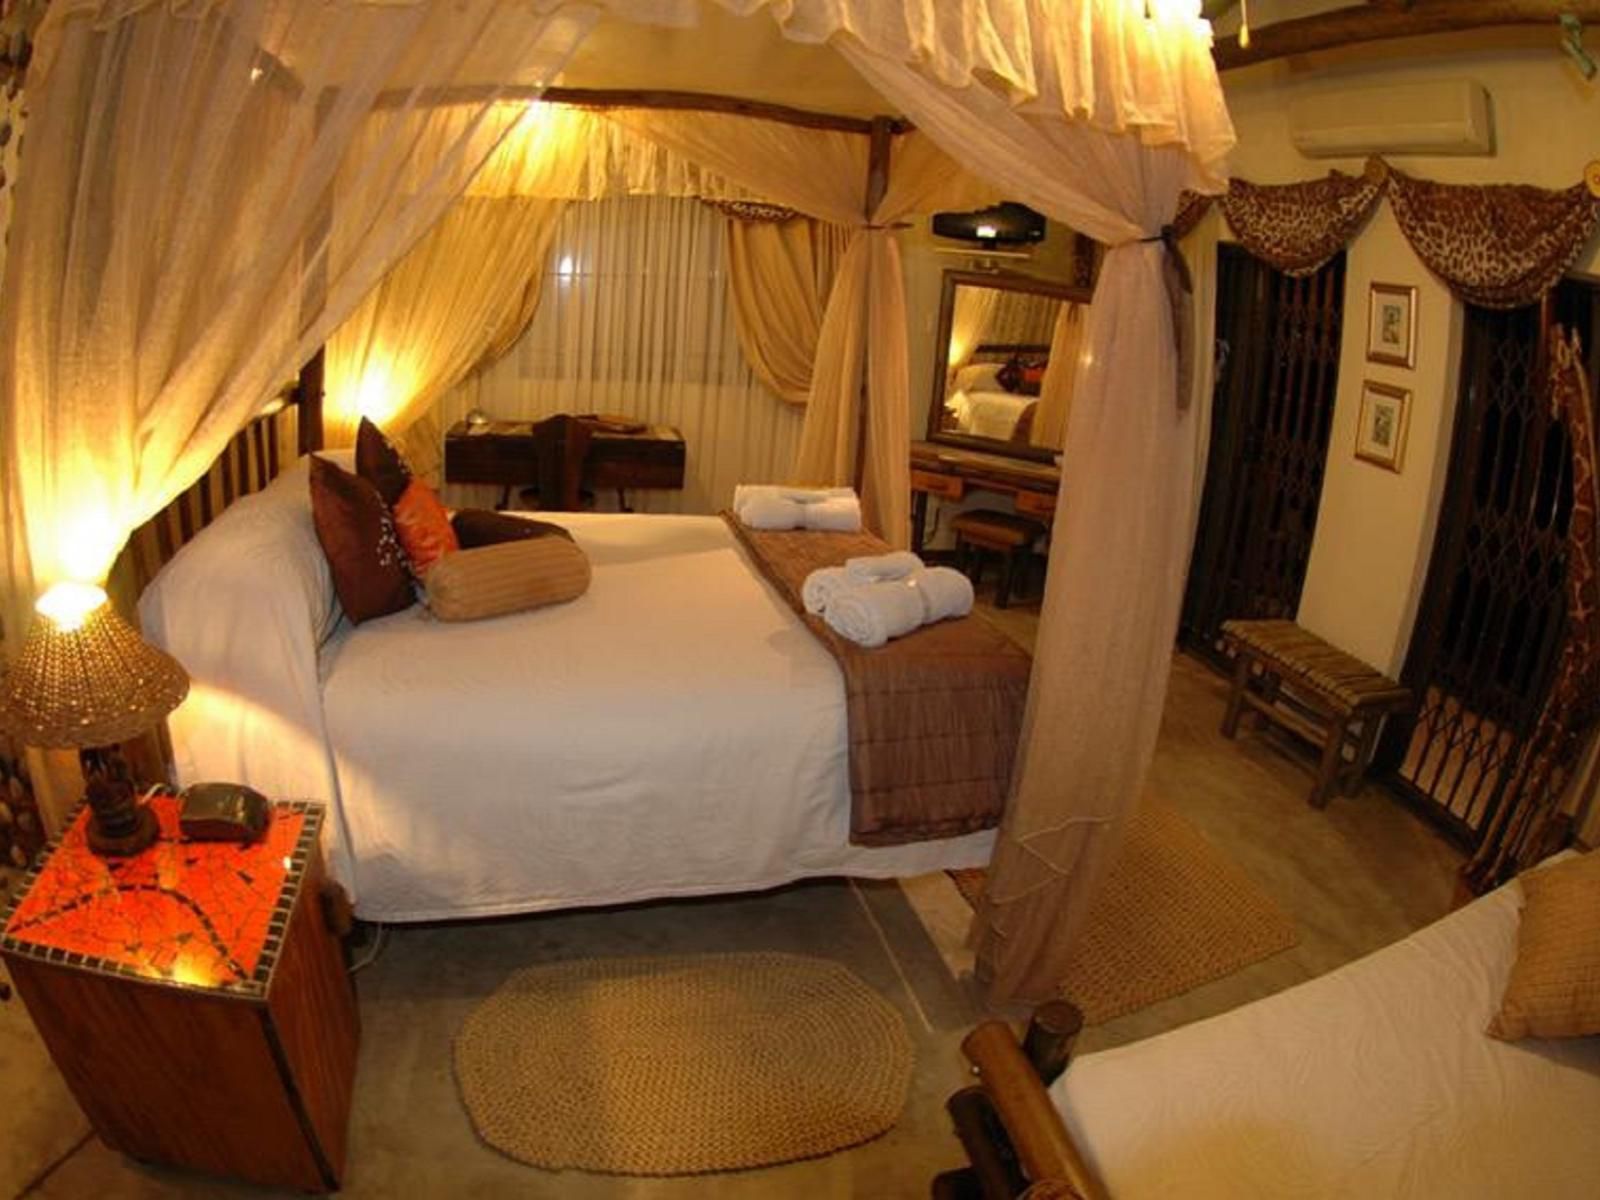 Roosfontein Bed And Breakfast And Conference Room Queensburgh Durban Kwazulu Natal South Africa Sepia Tones, Bedroom